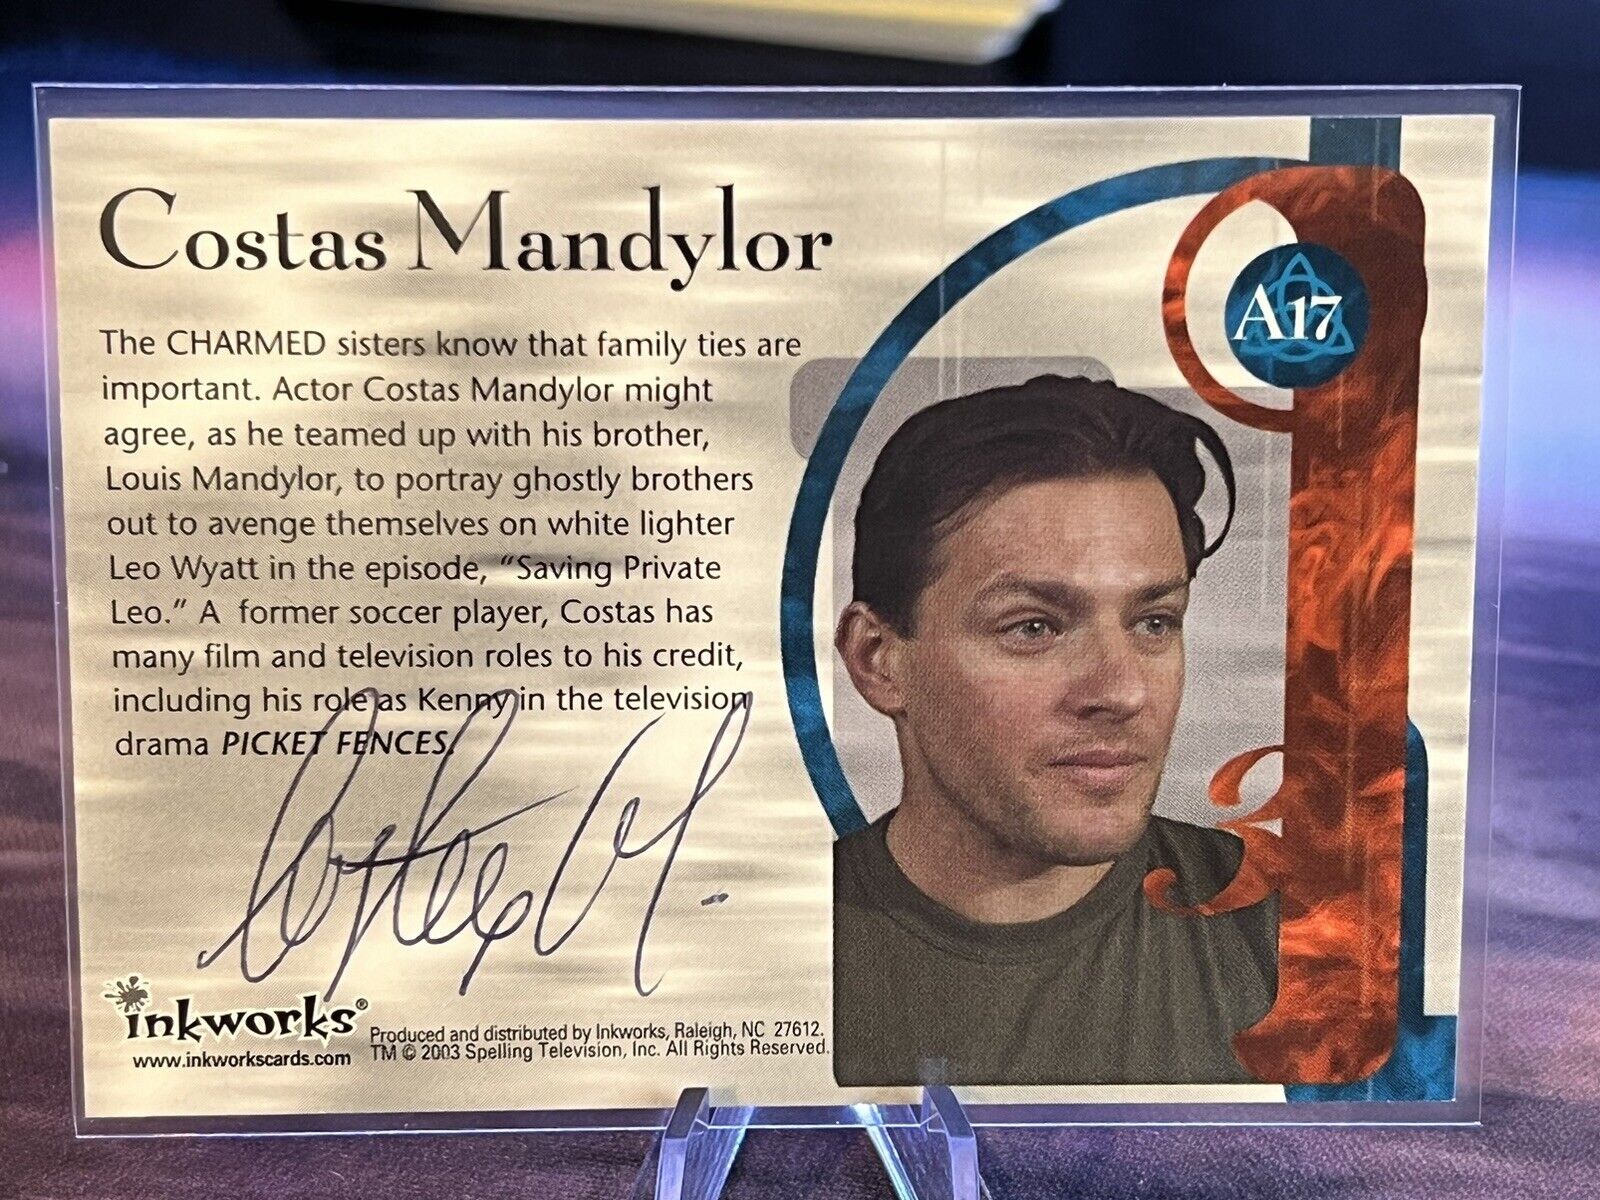 Charmed The Power Of Three Costas Mandylor A17 Autograph Card as Rick Lang